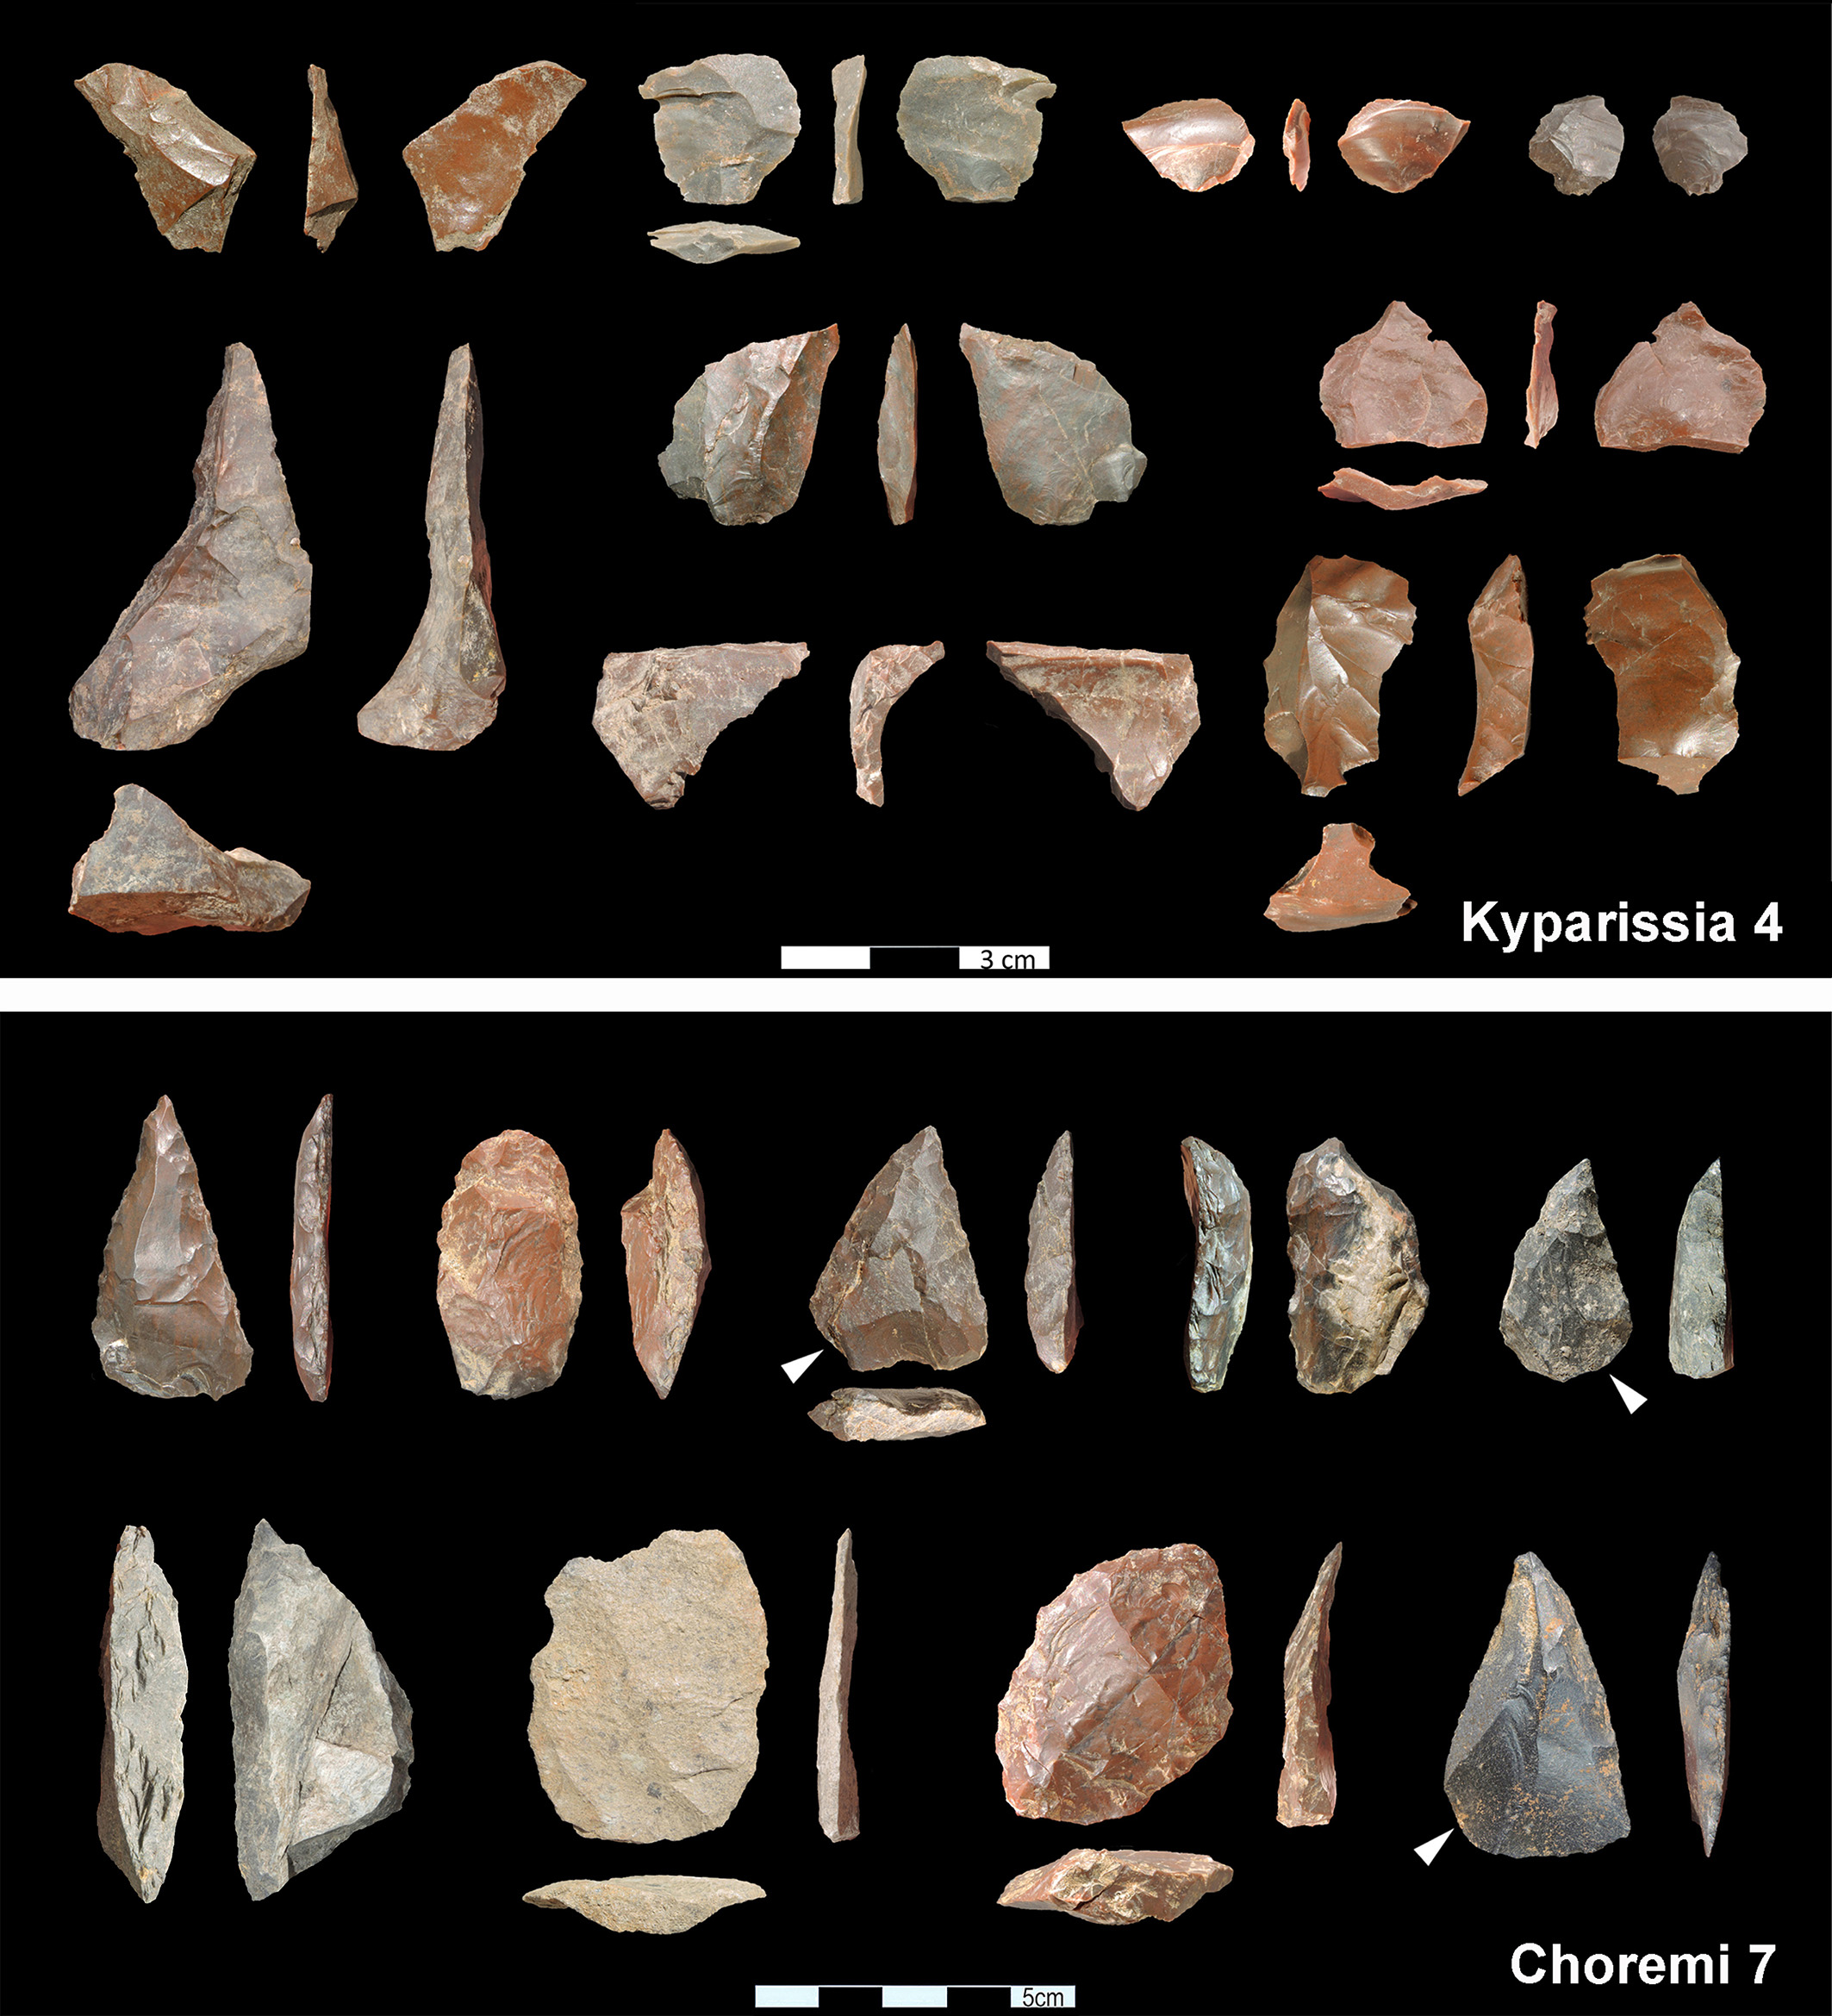 Fig_3_KYP_4_and_CHO7_Lithics_sm1-1.jpg